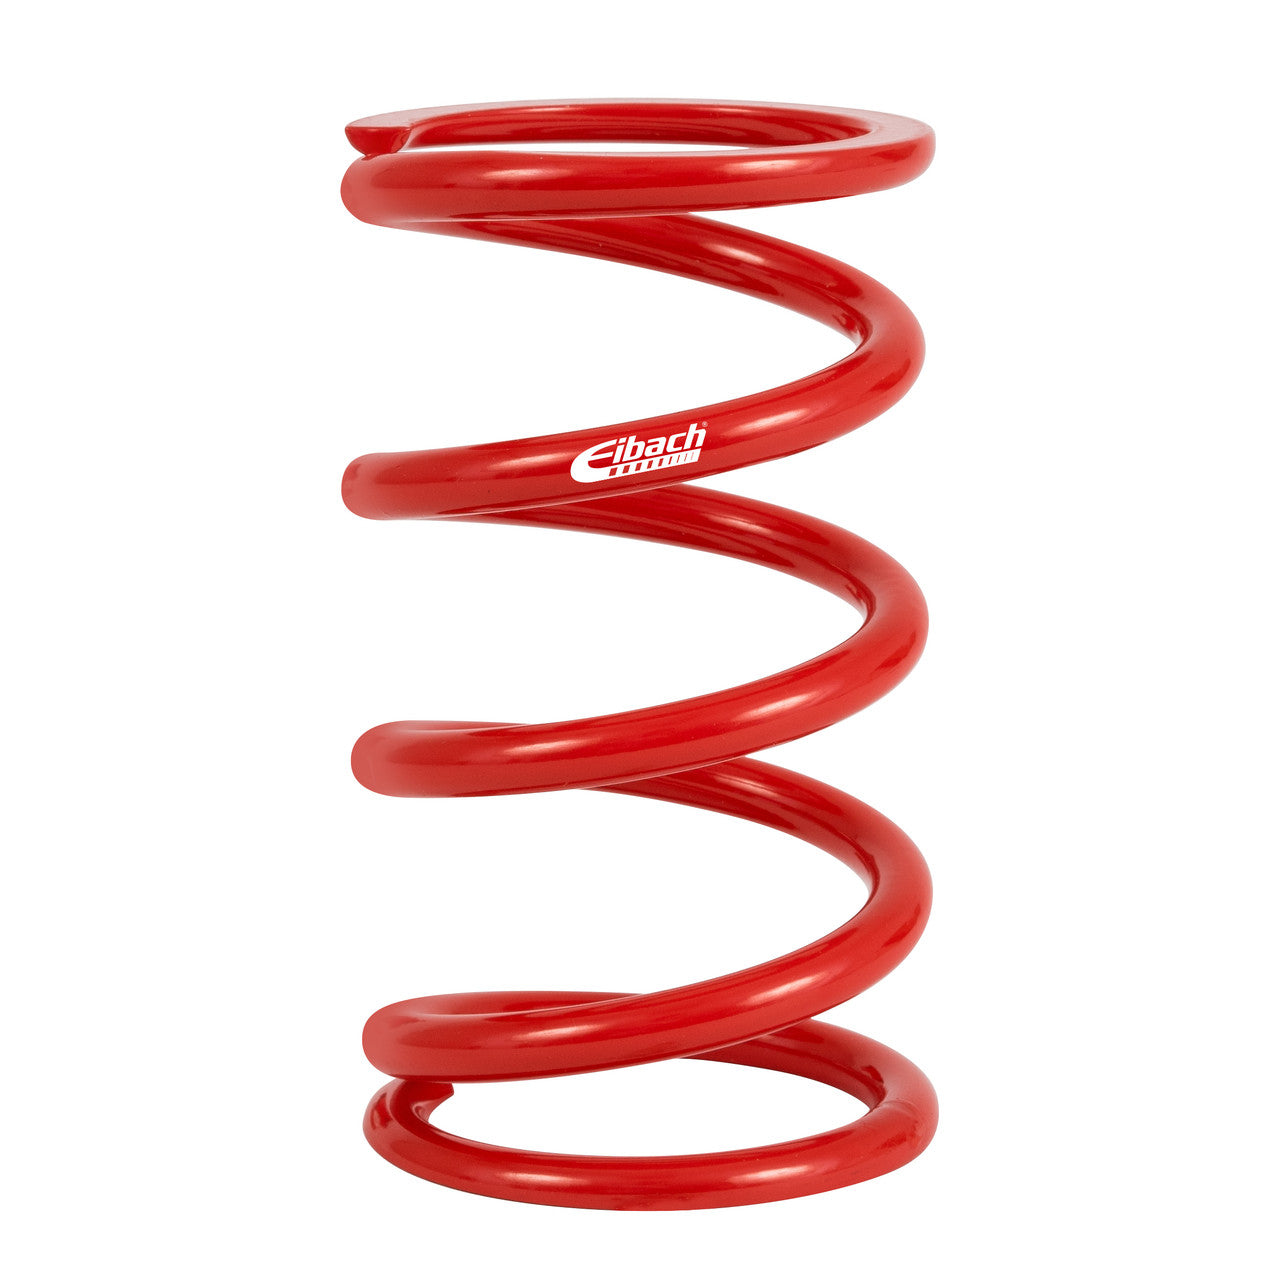 Eibach Metric Coilover Spring - 60MM I.D. 140-60-0200